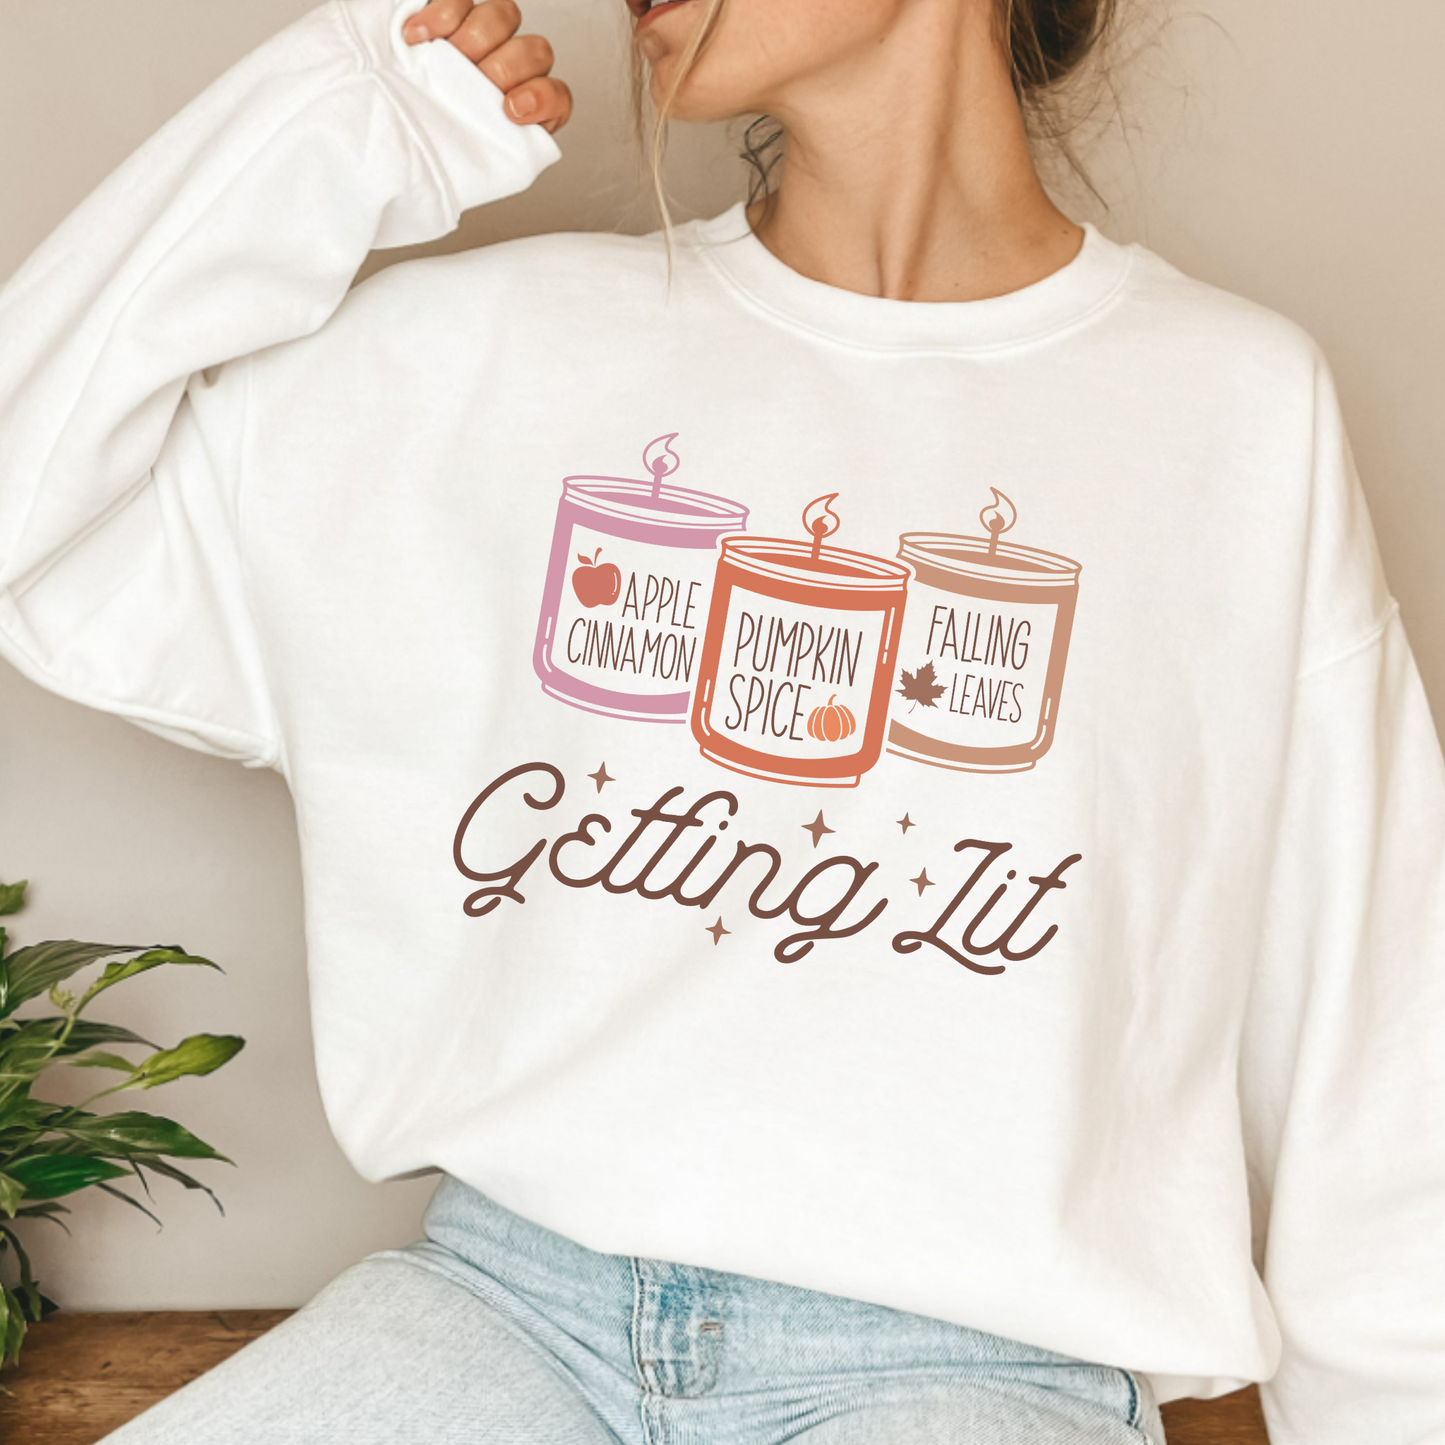 (Shirt not included) Getting Lit Candles   - Matte Clear Film Transfer